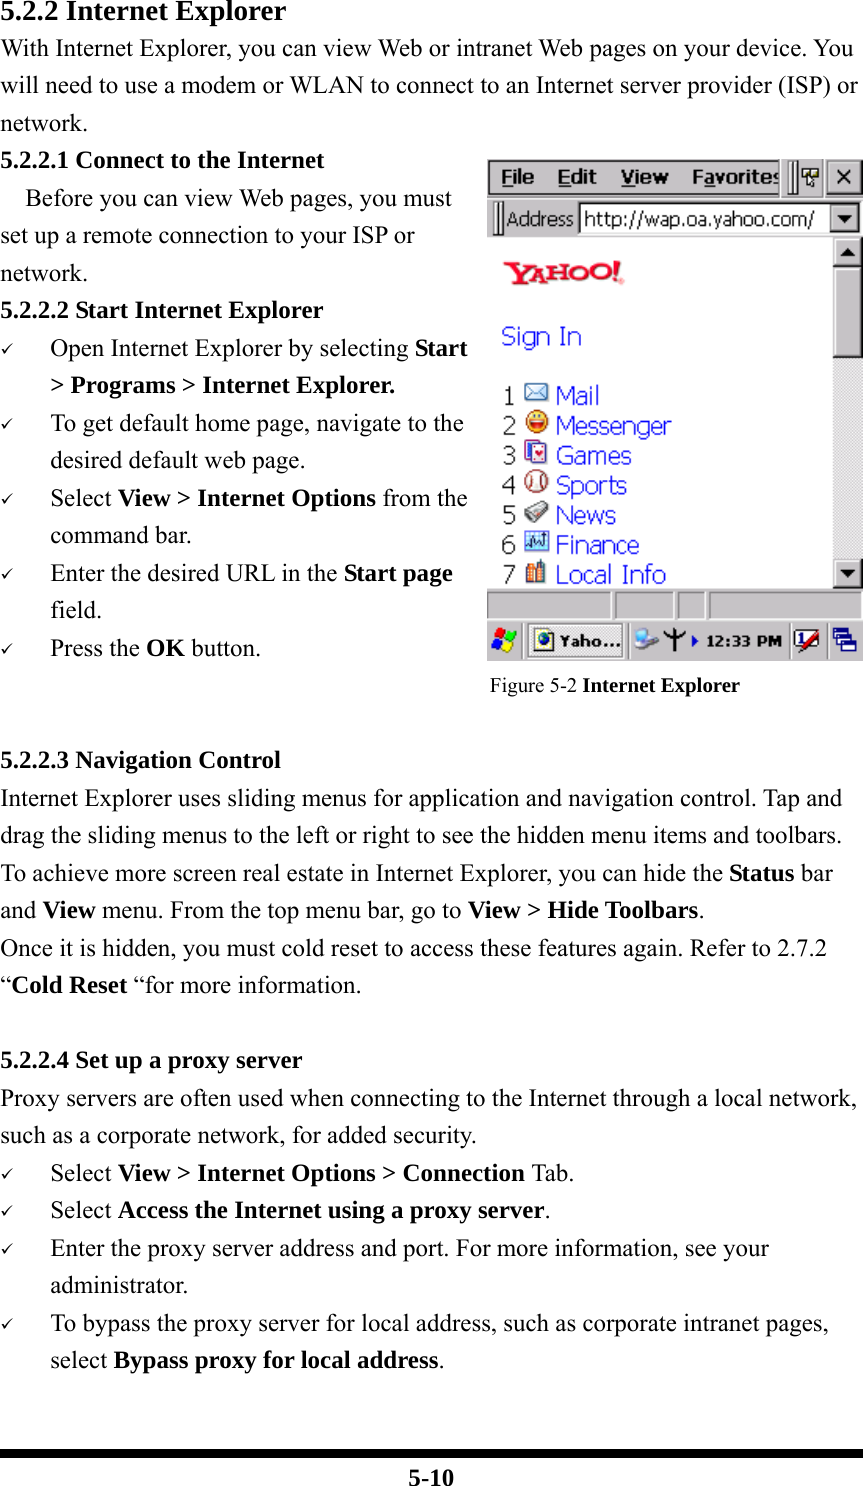  5-10 5.2.2 Internet Explorer With Internet Explorer, you can view Web or intranet Web pages on your device. You will need to use a modem or WLAN to connect to an Internet server provider (ISP) or network. 5.2.2.1 Connect to the Internet   Before you can view Web pages, you must set up a remote connection to your ISP or network. 5.2.2.2 Start Internet Explorer 9 Open Internet Explorer by selecting Start &gt; Programs &gt; Internet Explorer. 9 To get default home page, navigate to the desired default web page. 9 Select View &gt; Internet Options from the command bar. 9 Enter the desired URL in the Start page field. 9 Press the OK button. Figure 5-2 Internet Explorer  5.2.2.3 Navigation Control Internet Explorer uses sliding menus for application and navigation control. Tap and drag the sliding menus to the left or right to see the hidden menu items and toolbars. To achieve more screen real estate in Internet Explorer, you can hide the Status bar and View menu. From the top menu bar, go to View &gt; Hide Toolbars. Once it is hidden, you must cold reset to access these features again. Refer to 2.7.2 “Cold Reset “for more information.  5.2.2.4 Set up a proxy server Proxy servers are often used when connecting to the Internet through a local network, such as a corporate network, for added security. 9 Select View &gt; Internet Options &gt; Connection Tab. 9 Select Access the Internet using a proxy server. 9 Enter the proxy server address and port. For more information, see your administrator. 9 To bypass the proxy server for local address, such as corporate intranet pages, select Bypass proxy for local address.  